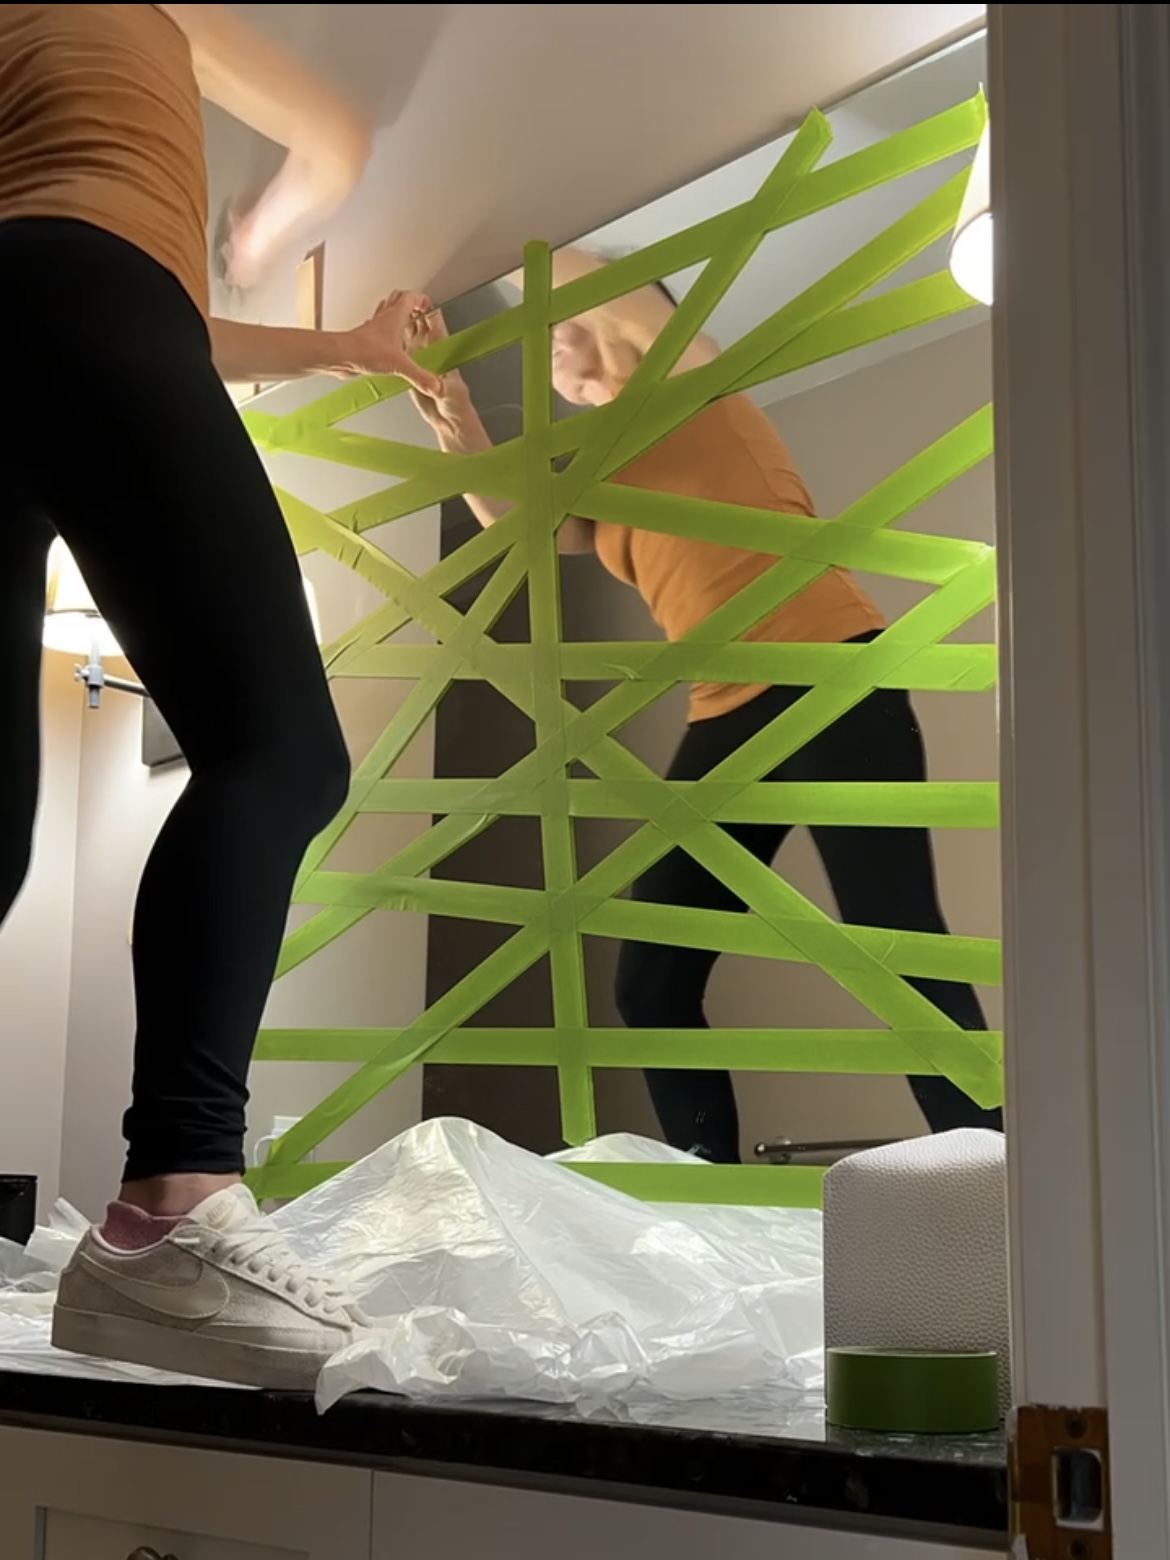 Woman removing mirror from wall. Mirror is crisscrossed with green tape.